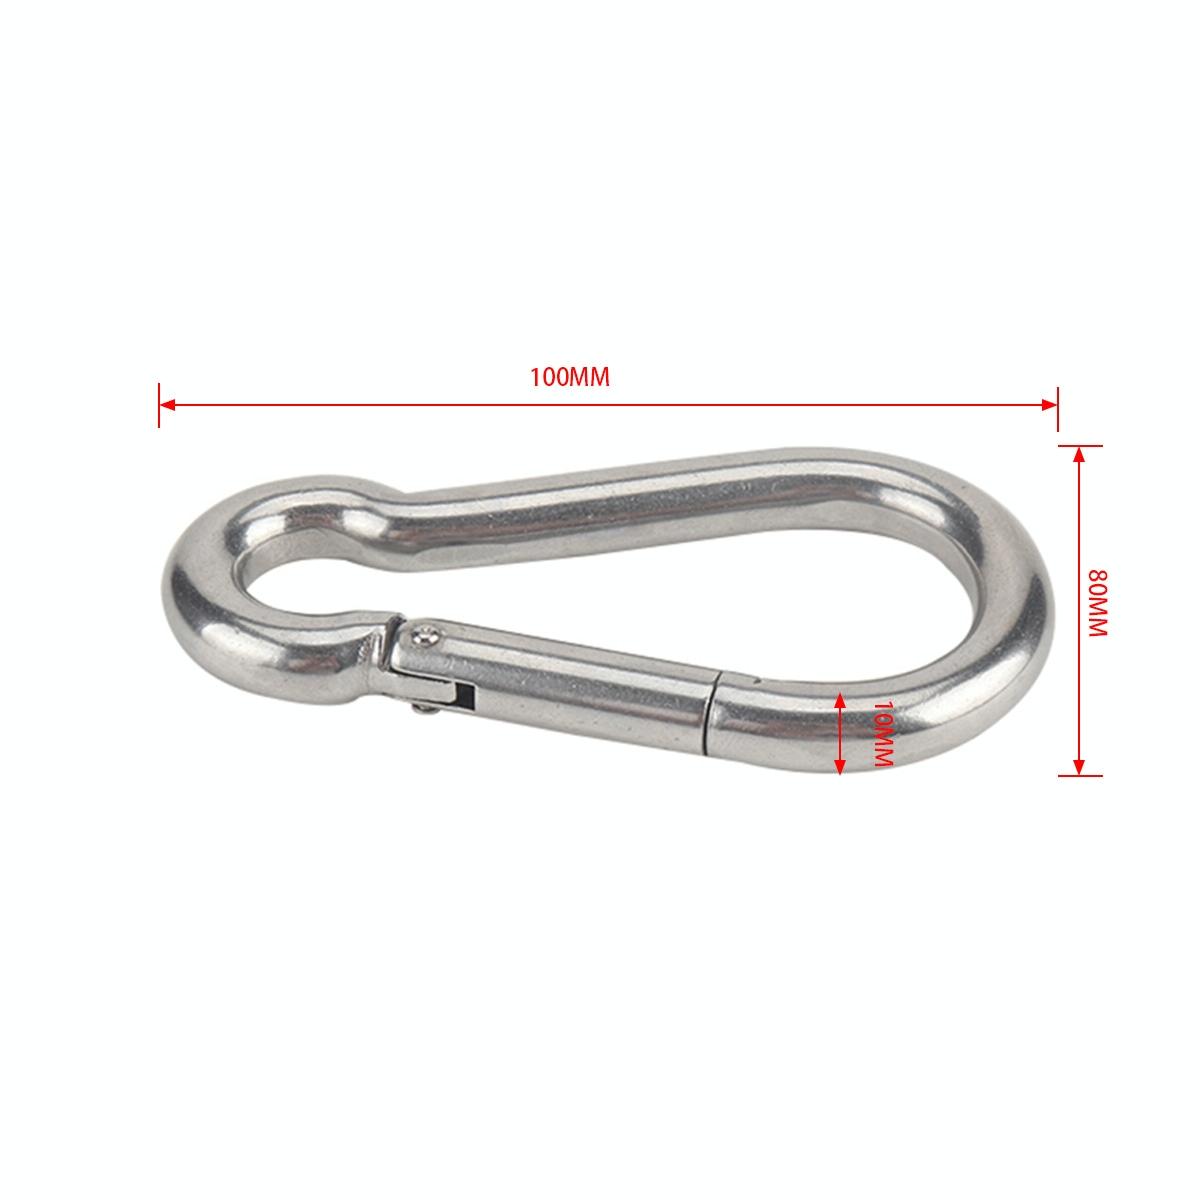 RV Trailer Spring Safety Rope Breakaway Cable, Safety Buckle Size:M10 x 100mm(Red)